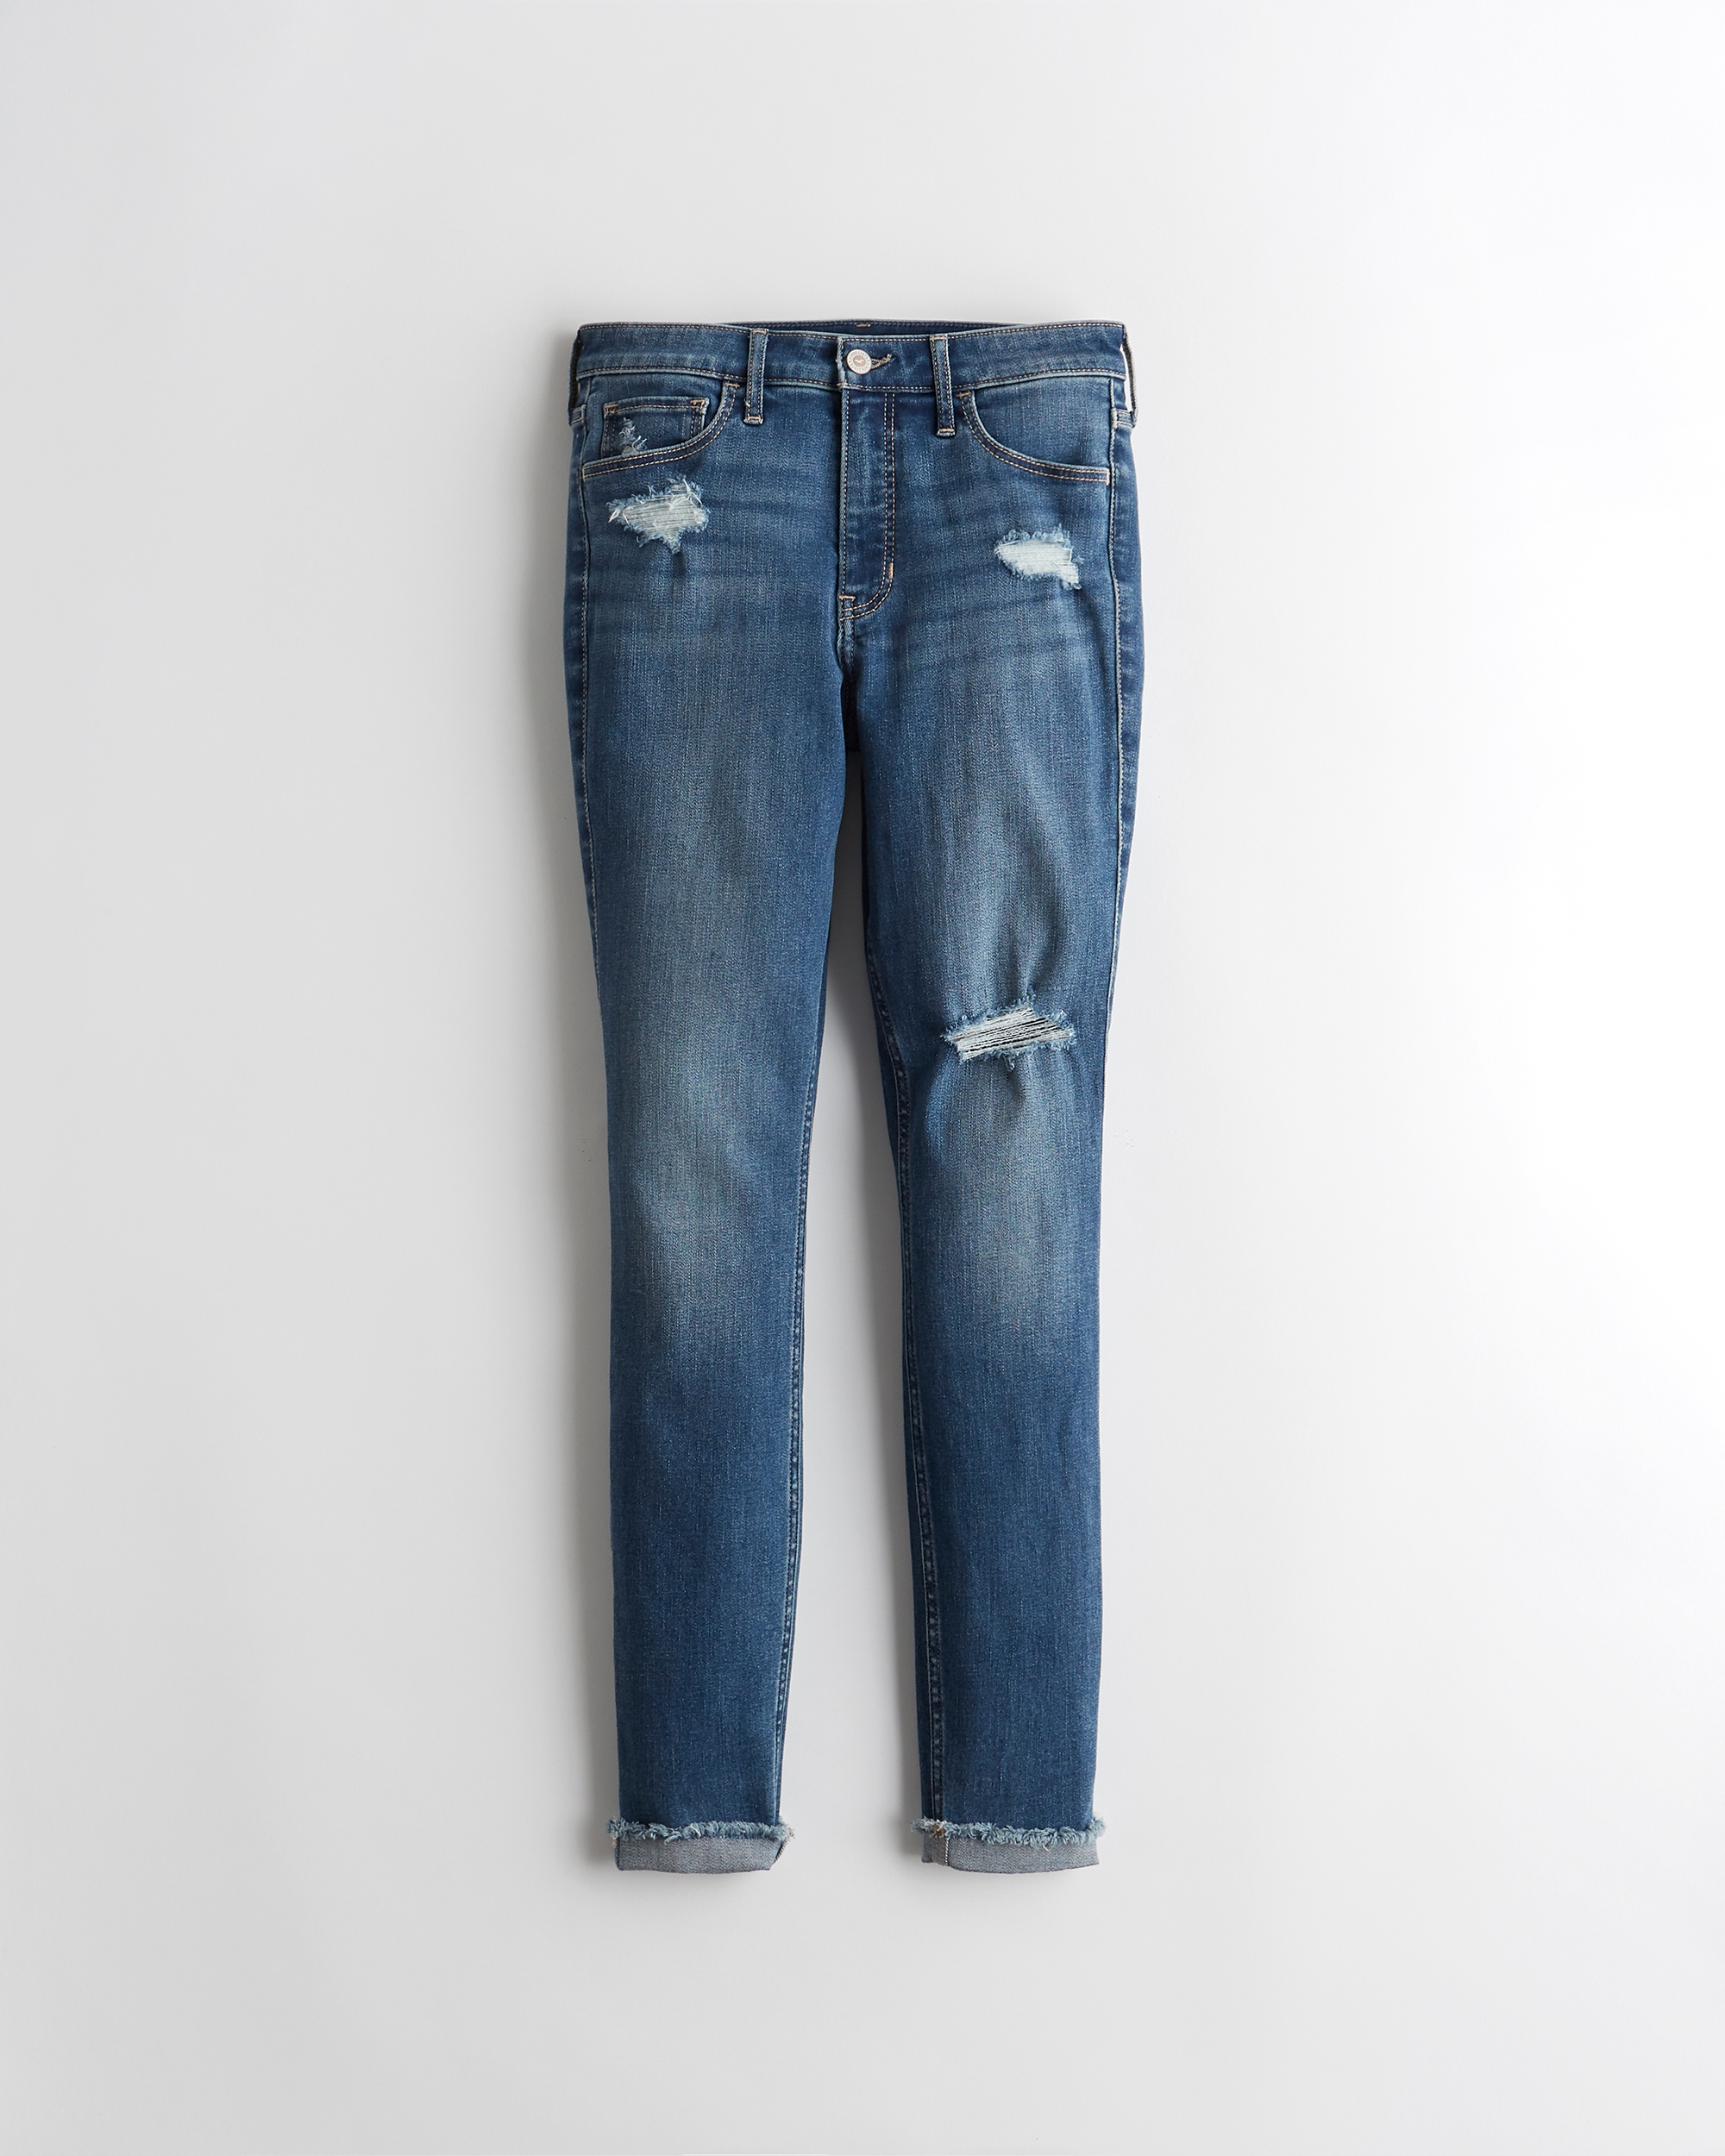 hollister blue ripped jeans